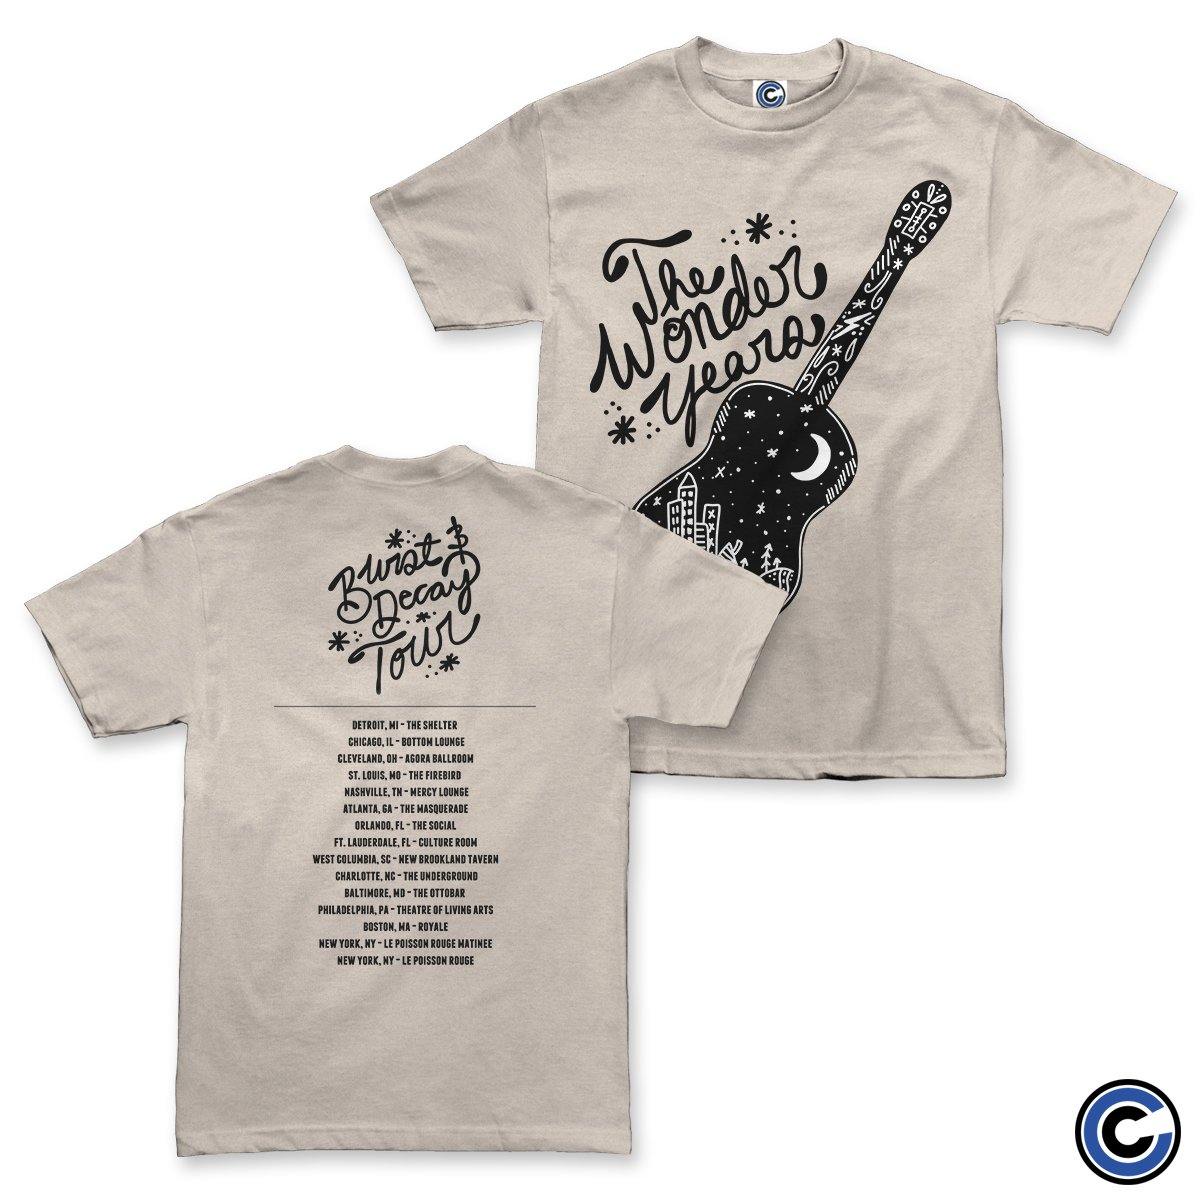 Buy – The Wonder Years "Acoustic" Shirt – Band & Music Merch – Cold Cuts Merch